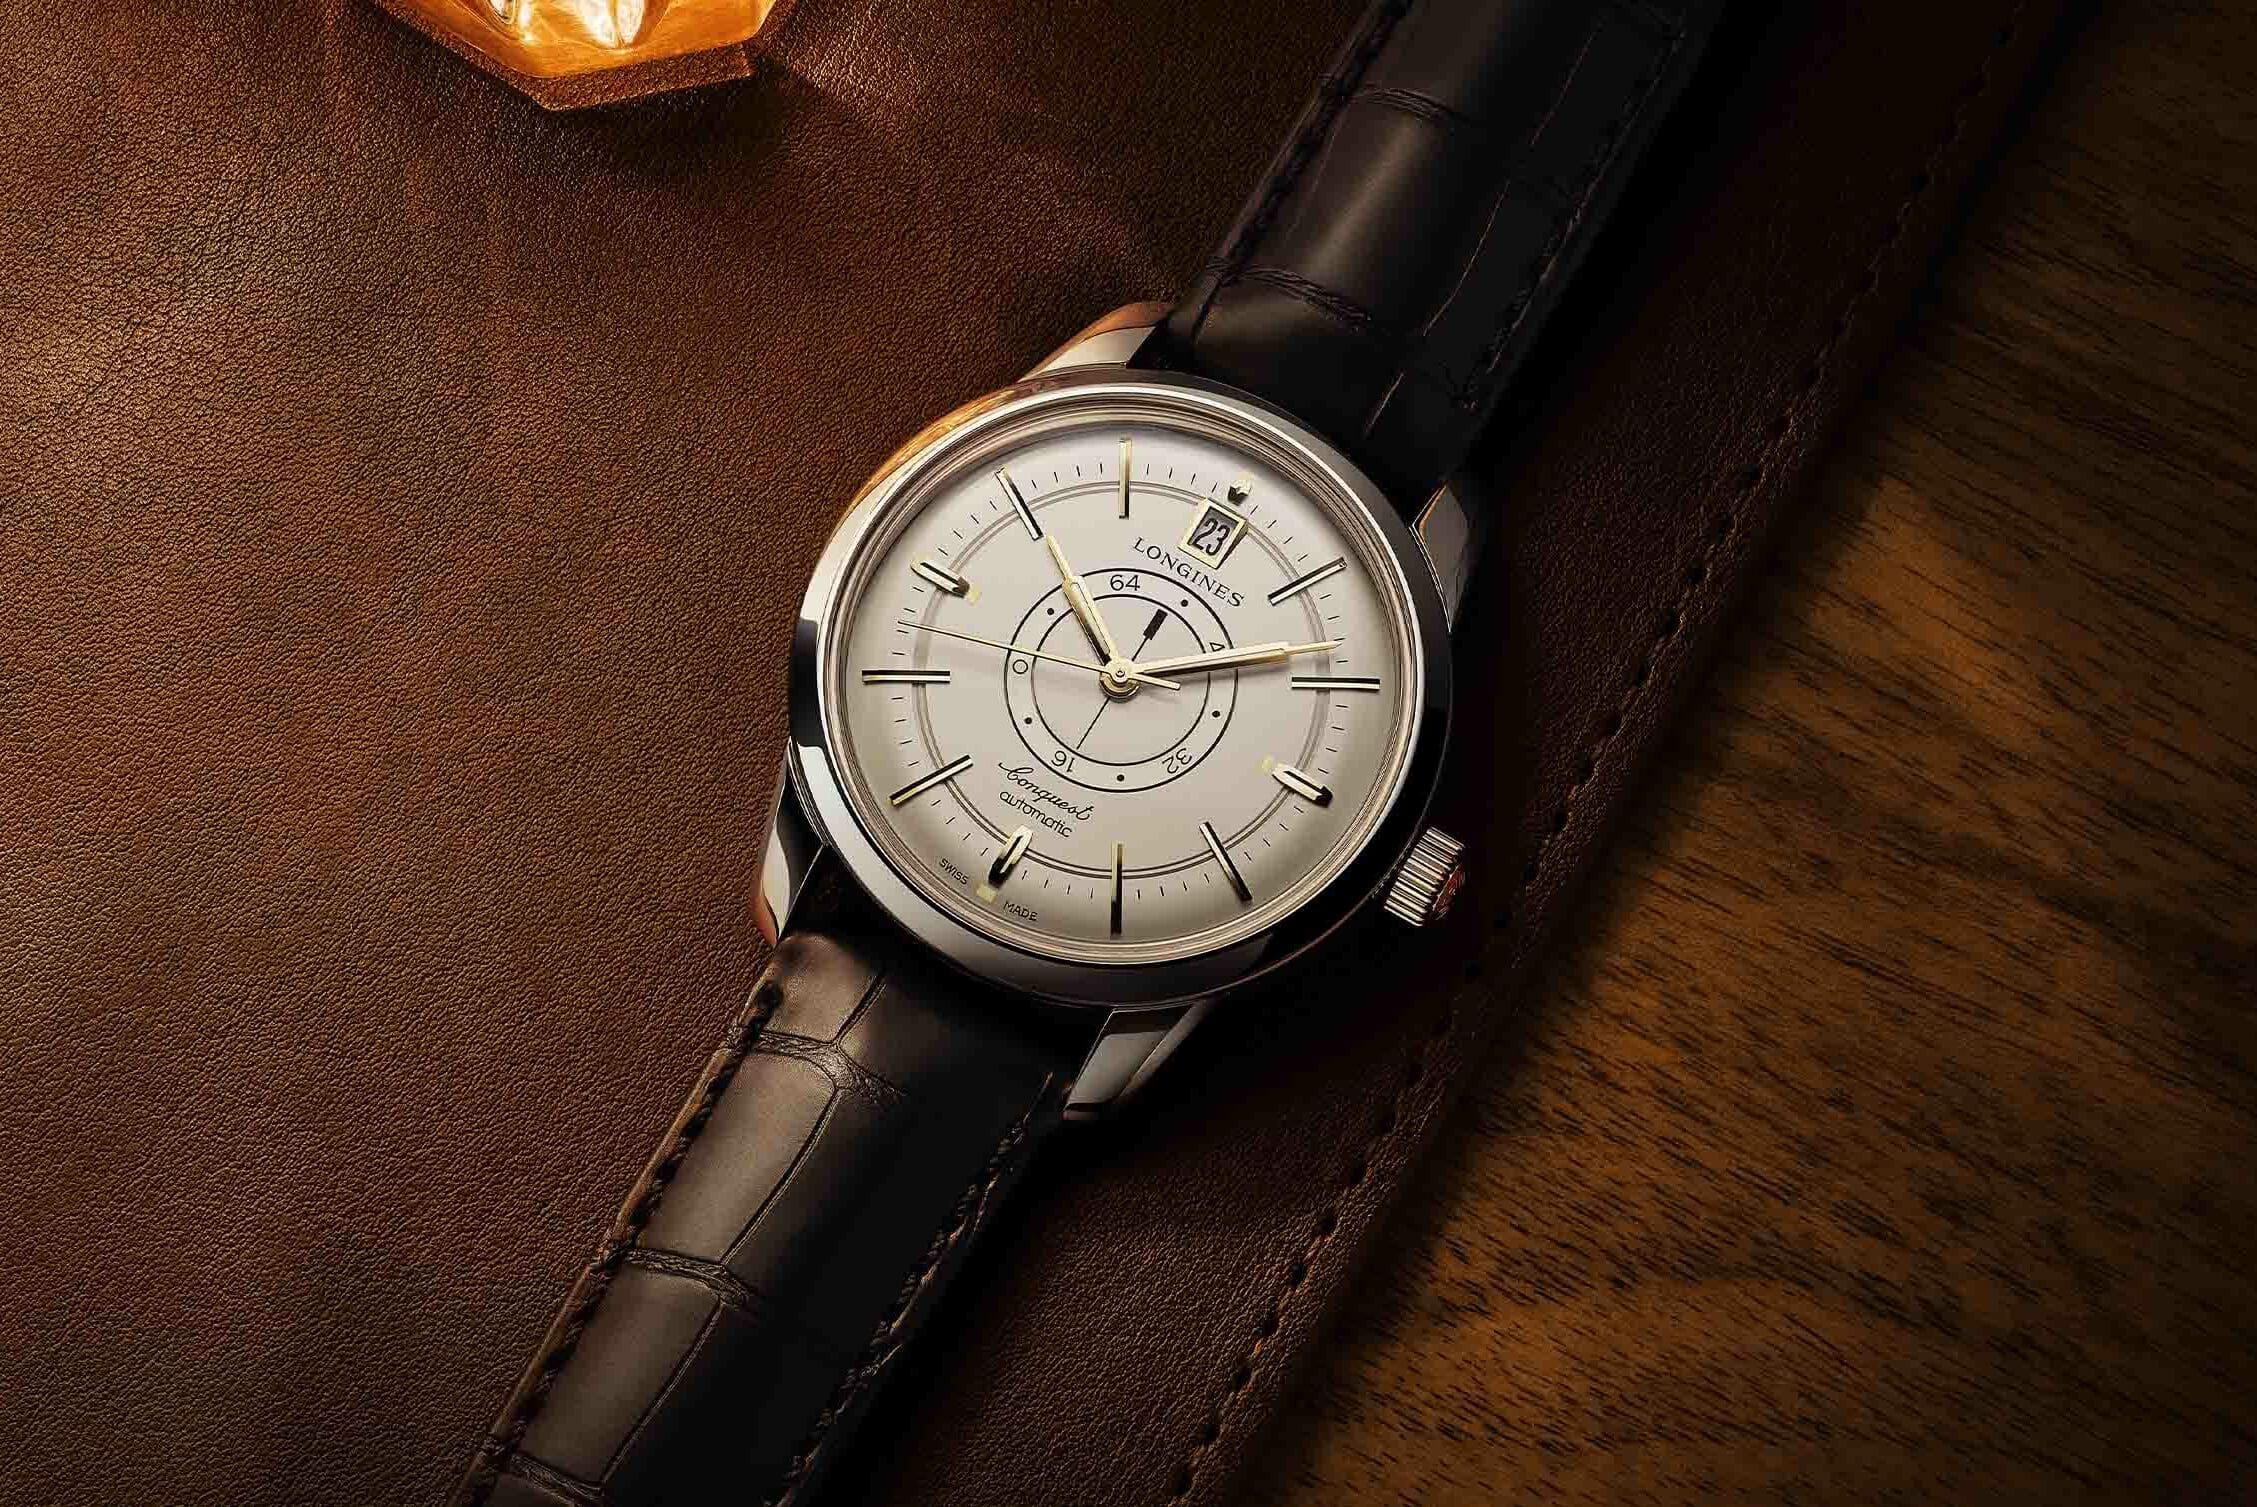 The Longines Conquest Heritage Central Power Reserve is a recreation of a rare 1959 release